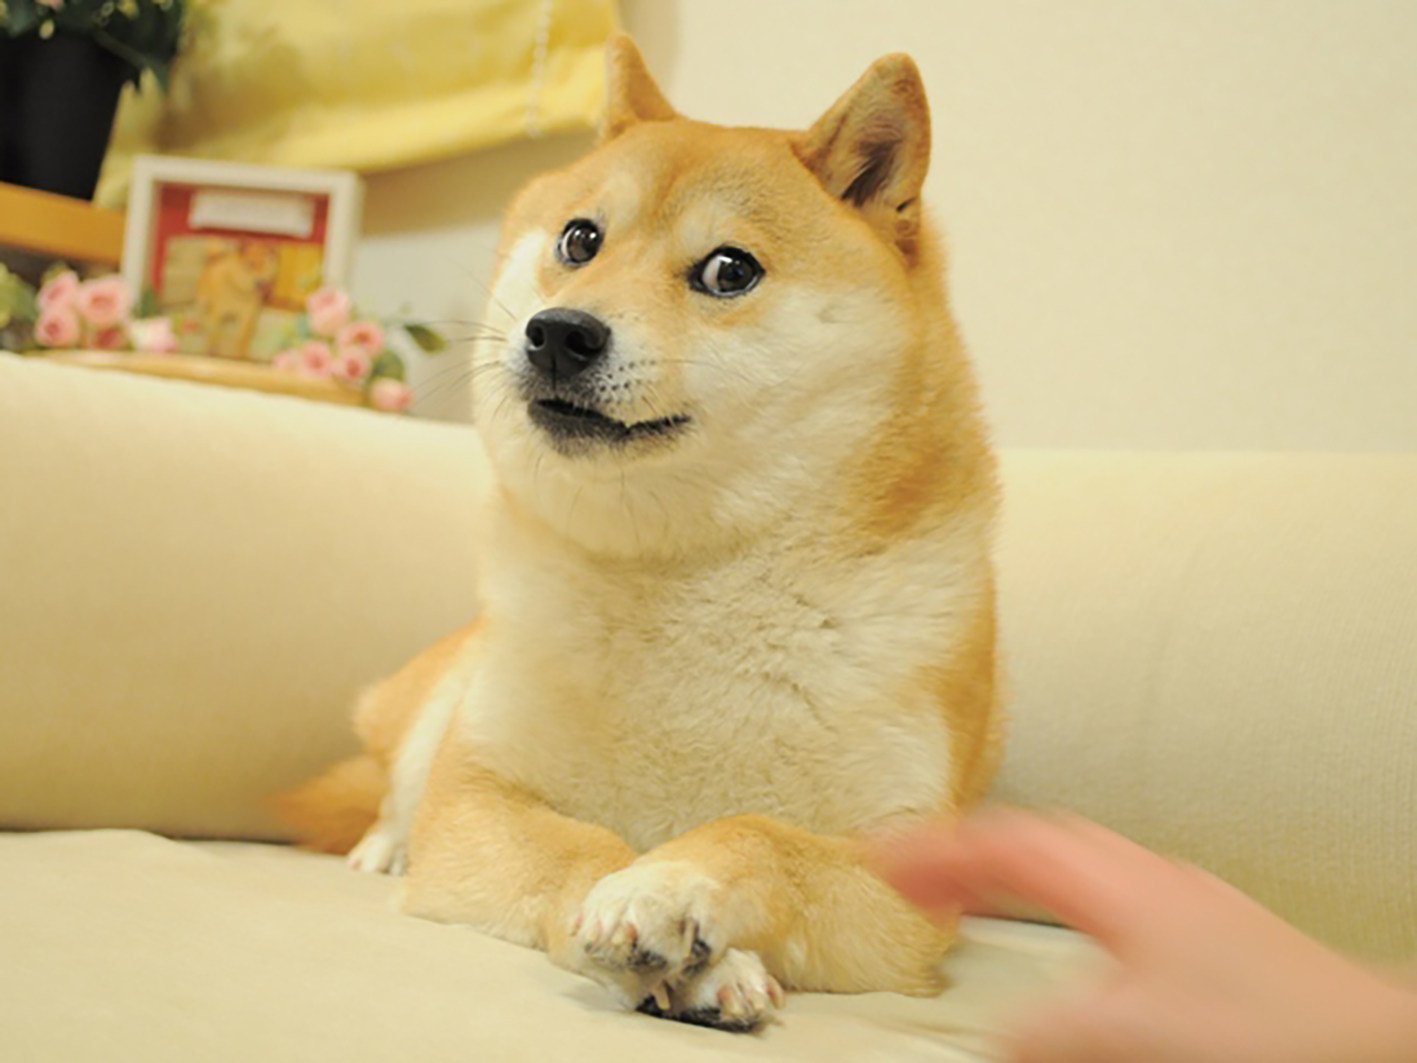 The photo of shiba inu Kabuso posted online in 2010 by Atsuko Sato, who adopted her as a rescue puppy. It spawned online memes, one of which led to the creation of the cryptocurrency Dogecoin, and was turned into an NFT. Photo: Handout